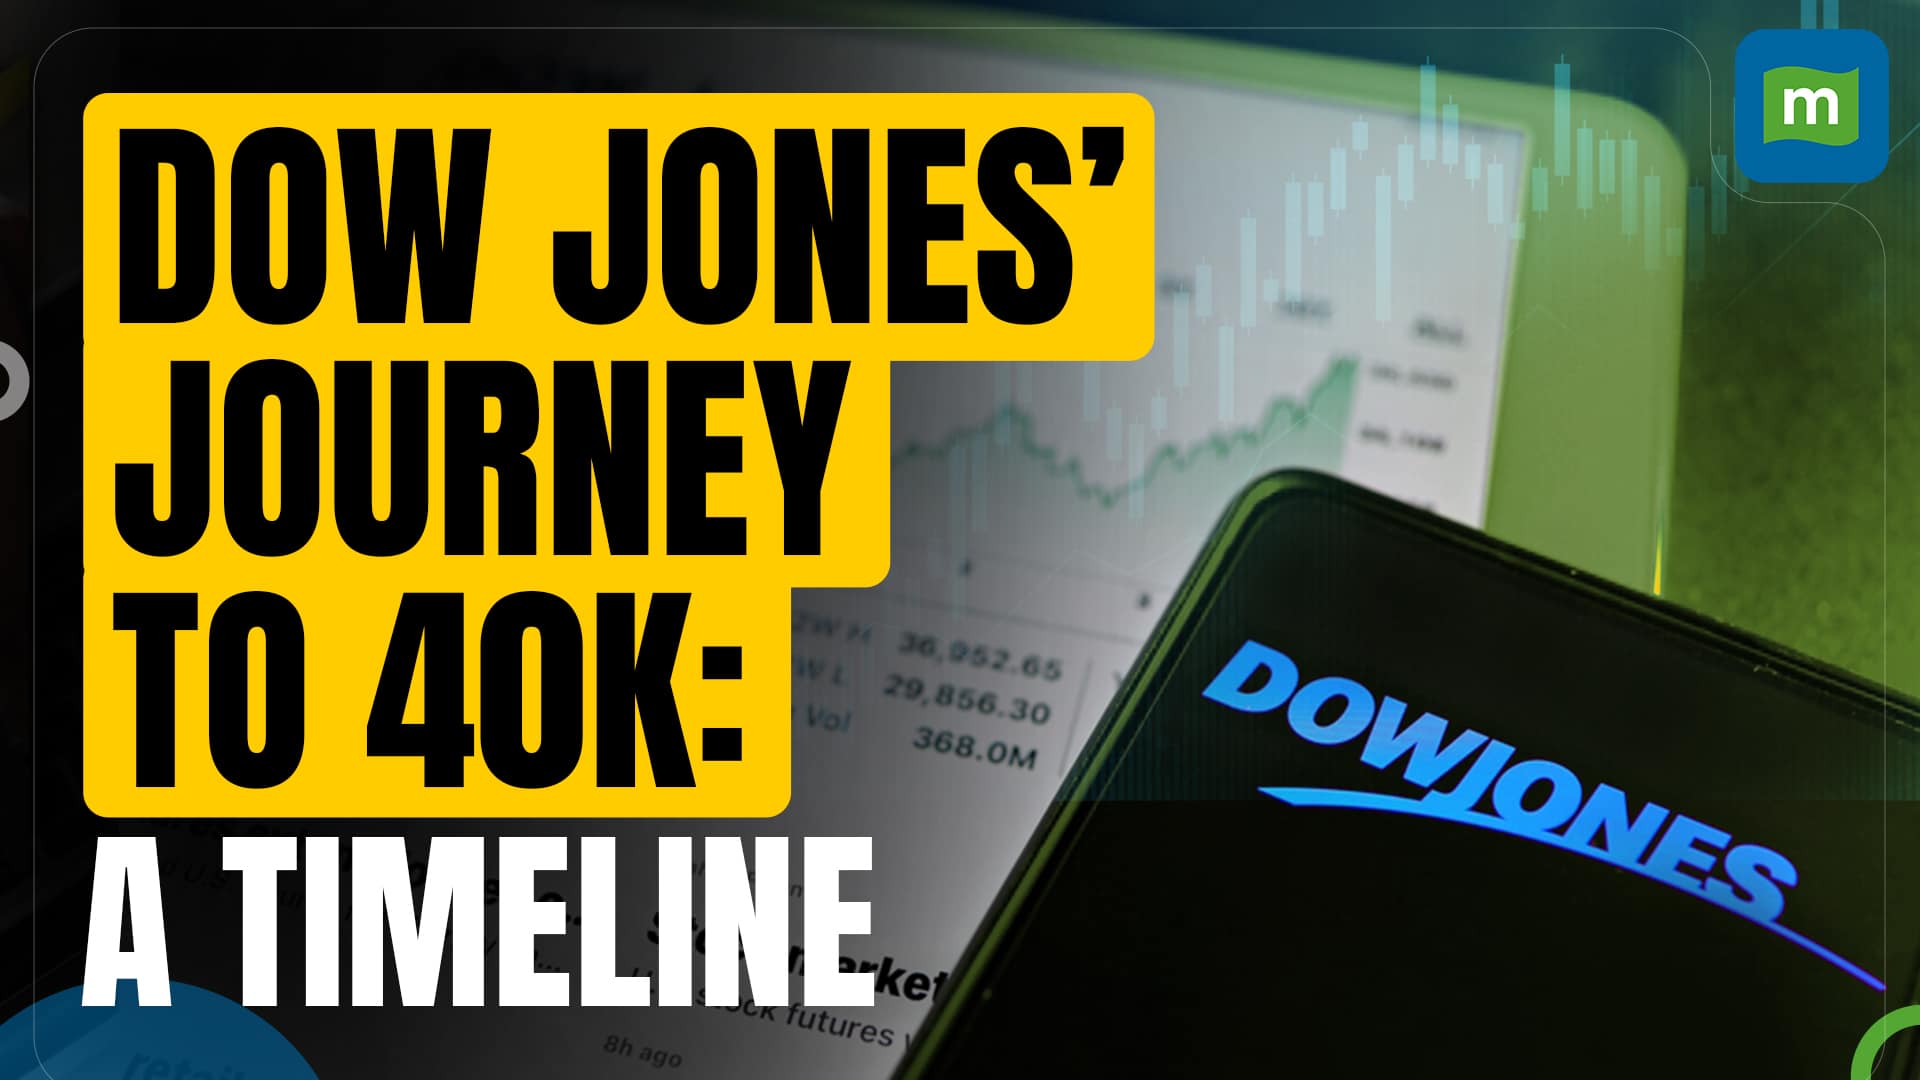 Dow Jones at 40K: Timeline of Events That Transpired During Its Journey Hitting Different Milestones